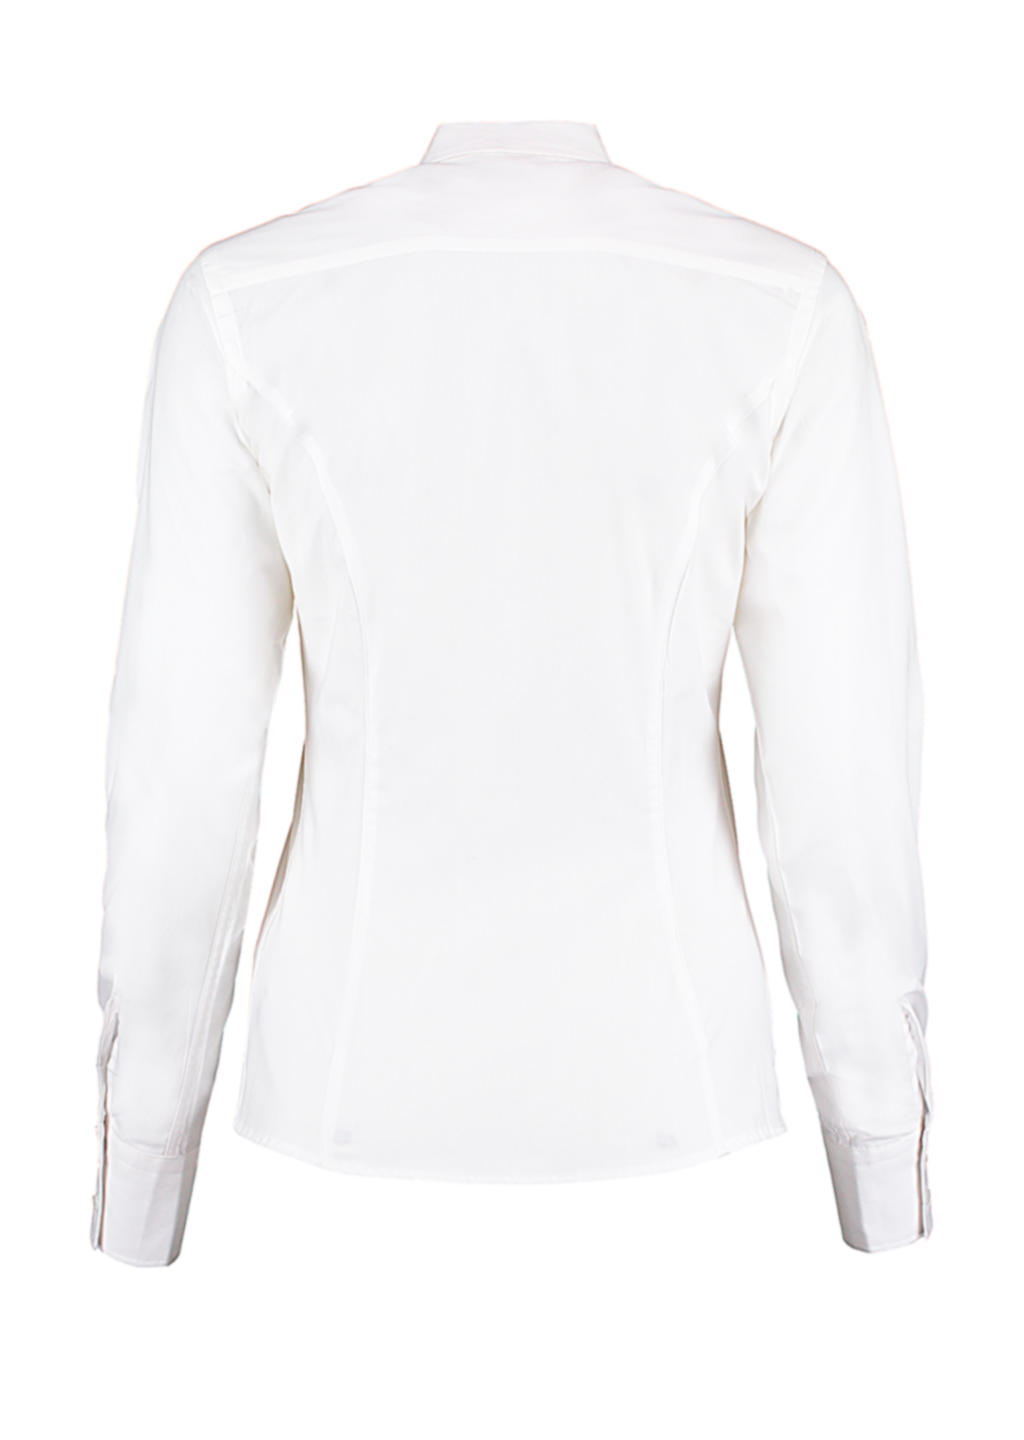  Womens Tailored Fit City Shirt in Farbe White